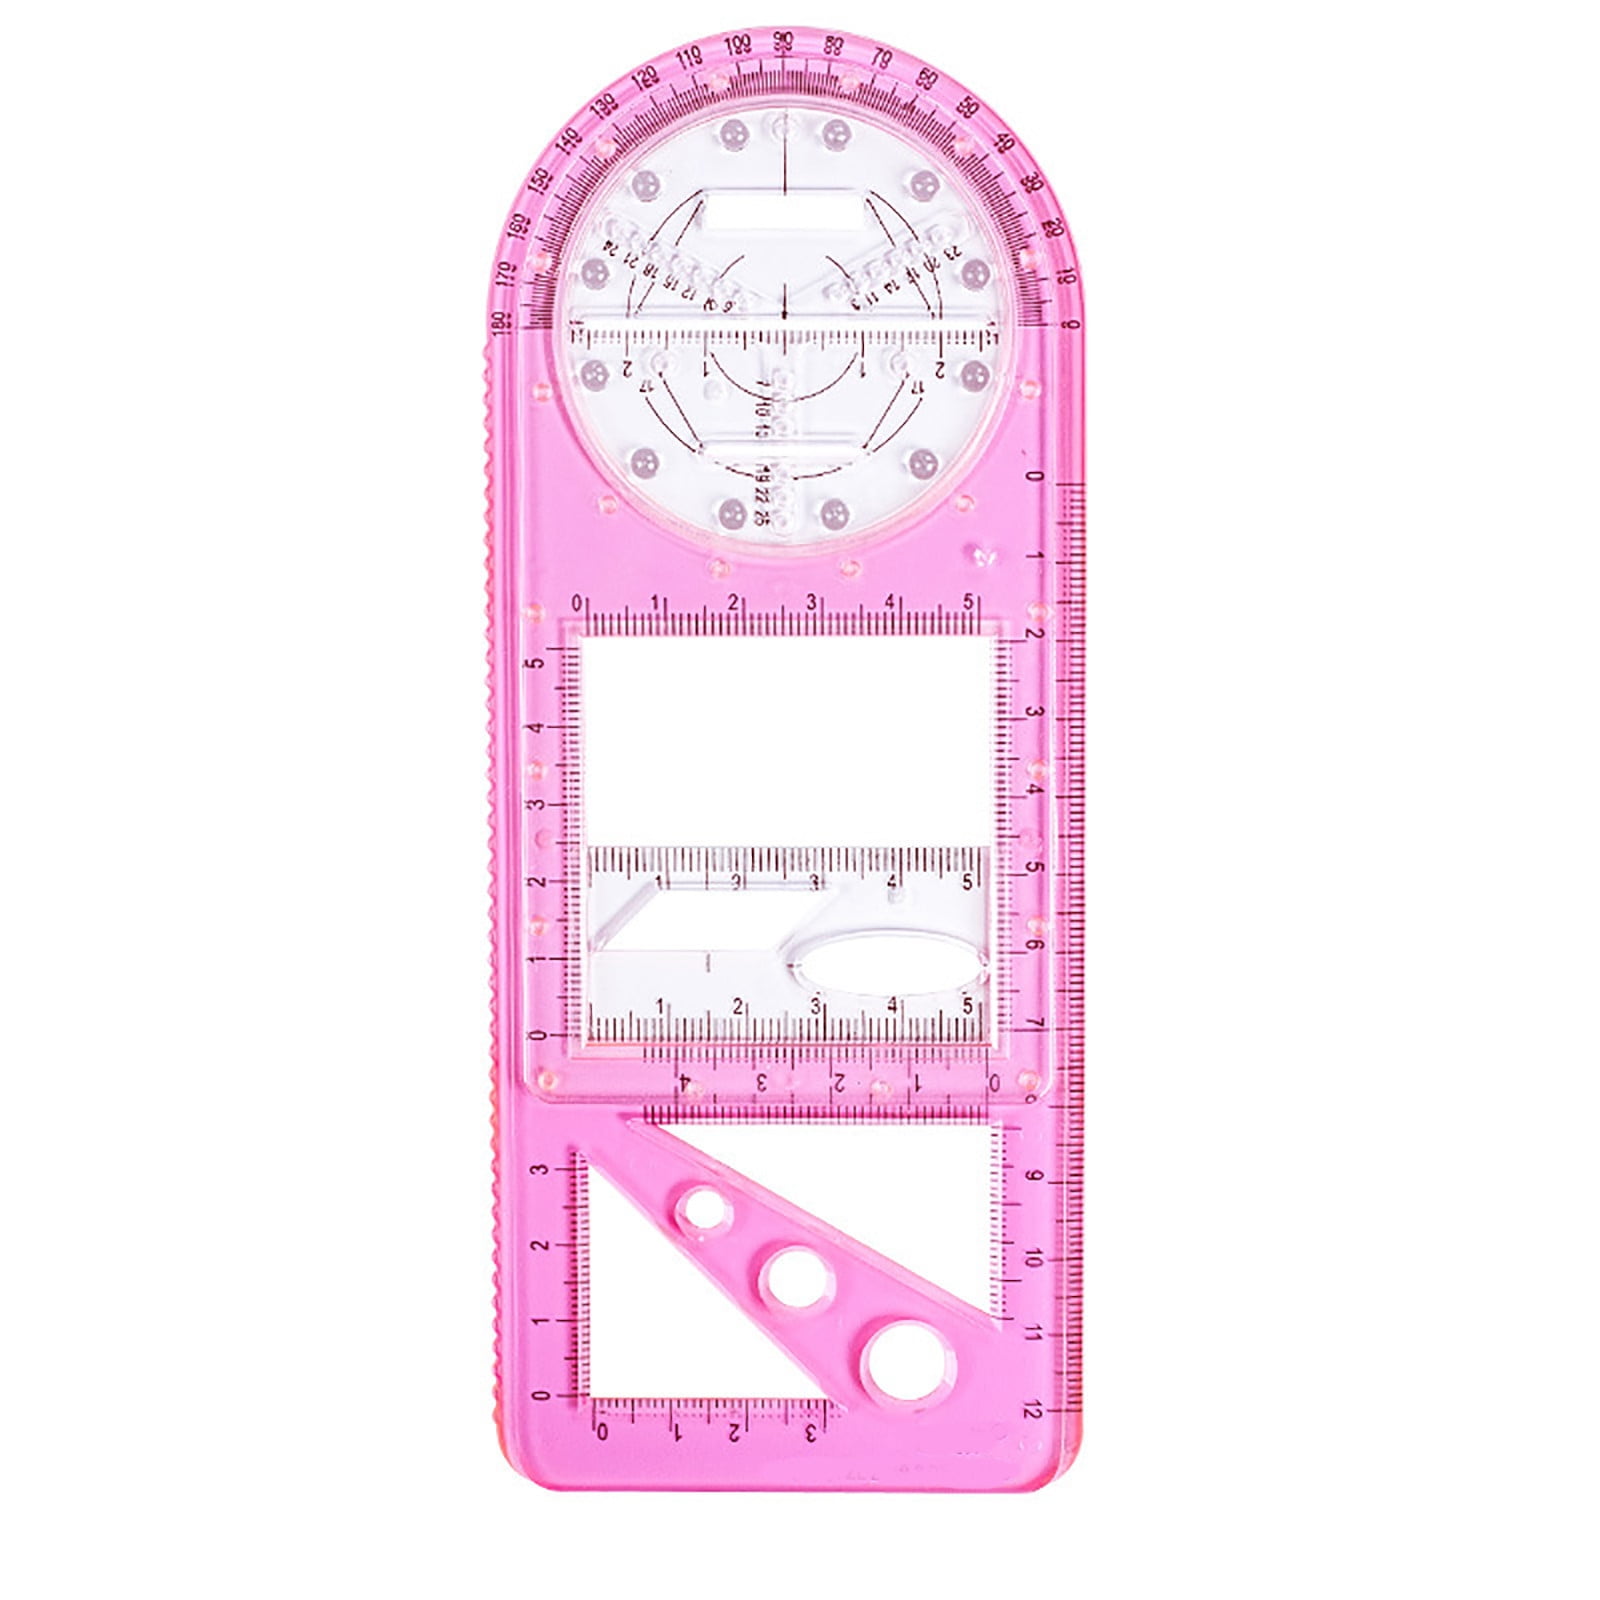 STOBOK 1 Set Protractor Tools Ruler Measurement Tool File Folders  Decorative Meter Sticks for Classroom Architecture Drawing Supply Drafting  Tool